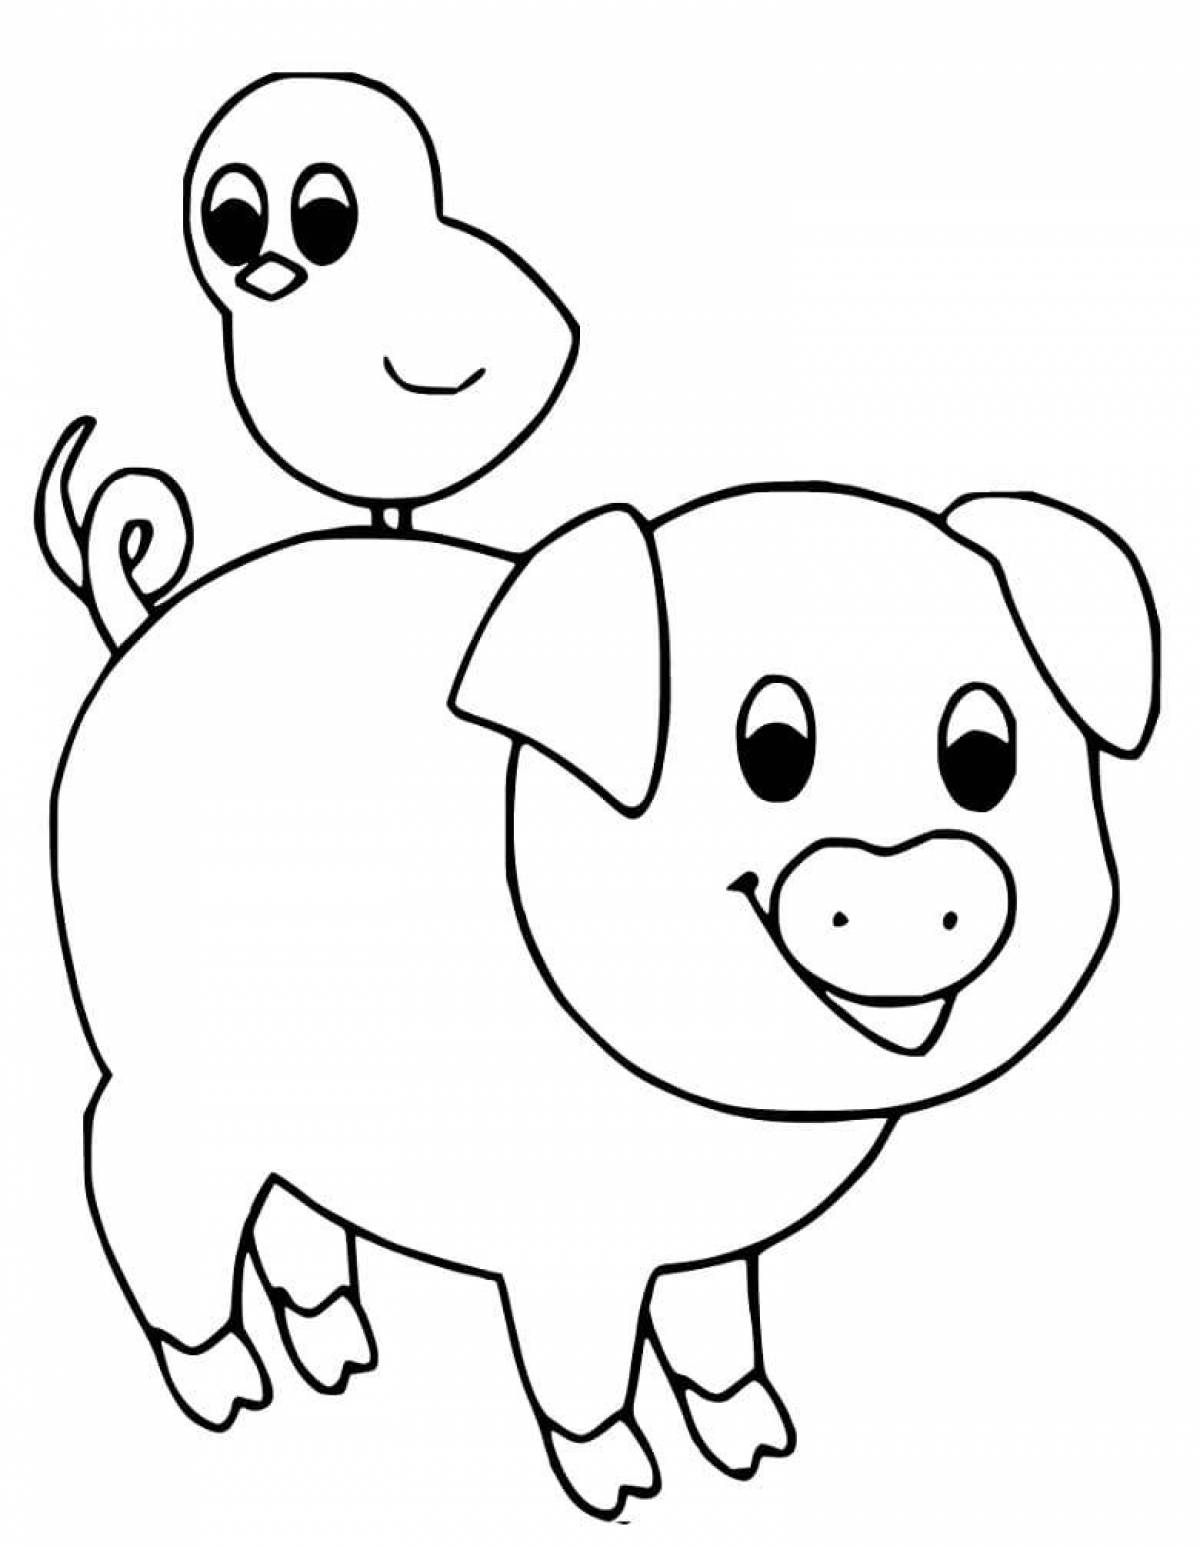 Amazing pet coloring pages for 6-7 year olds